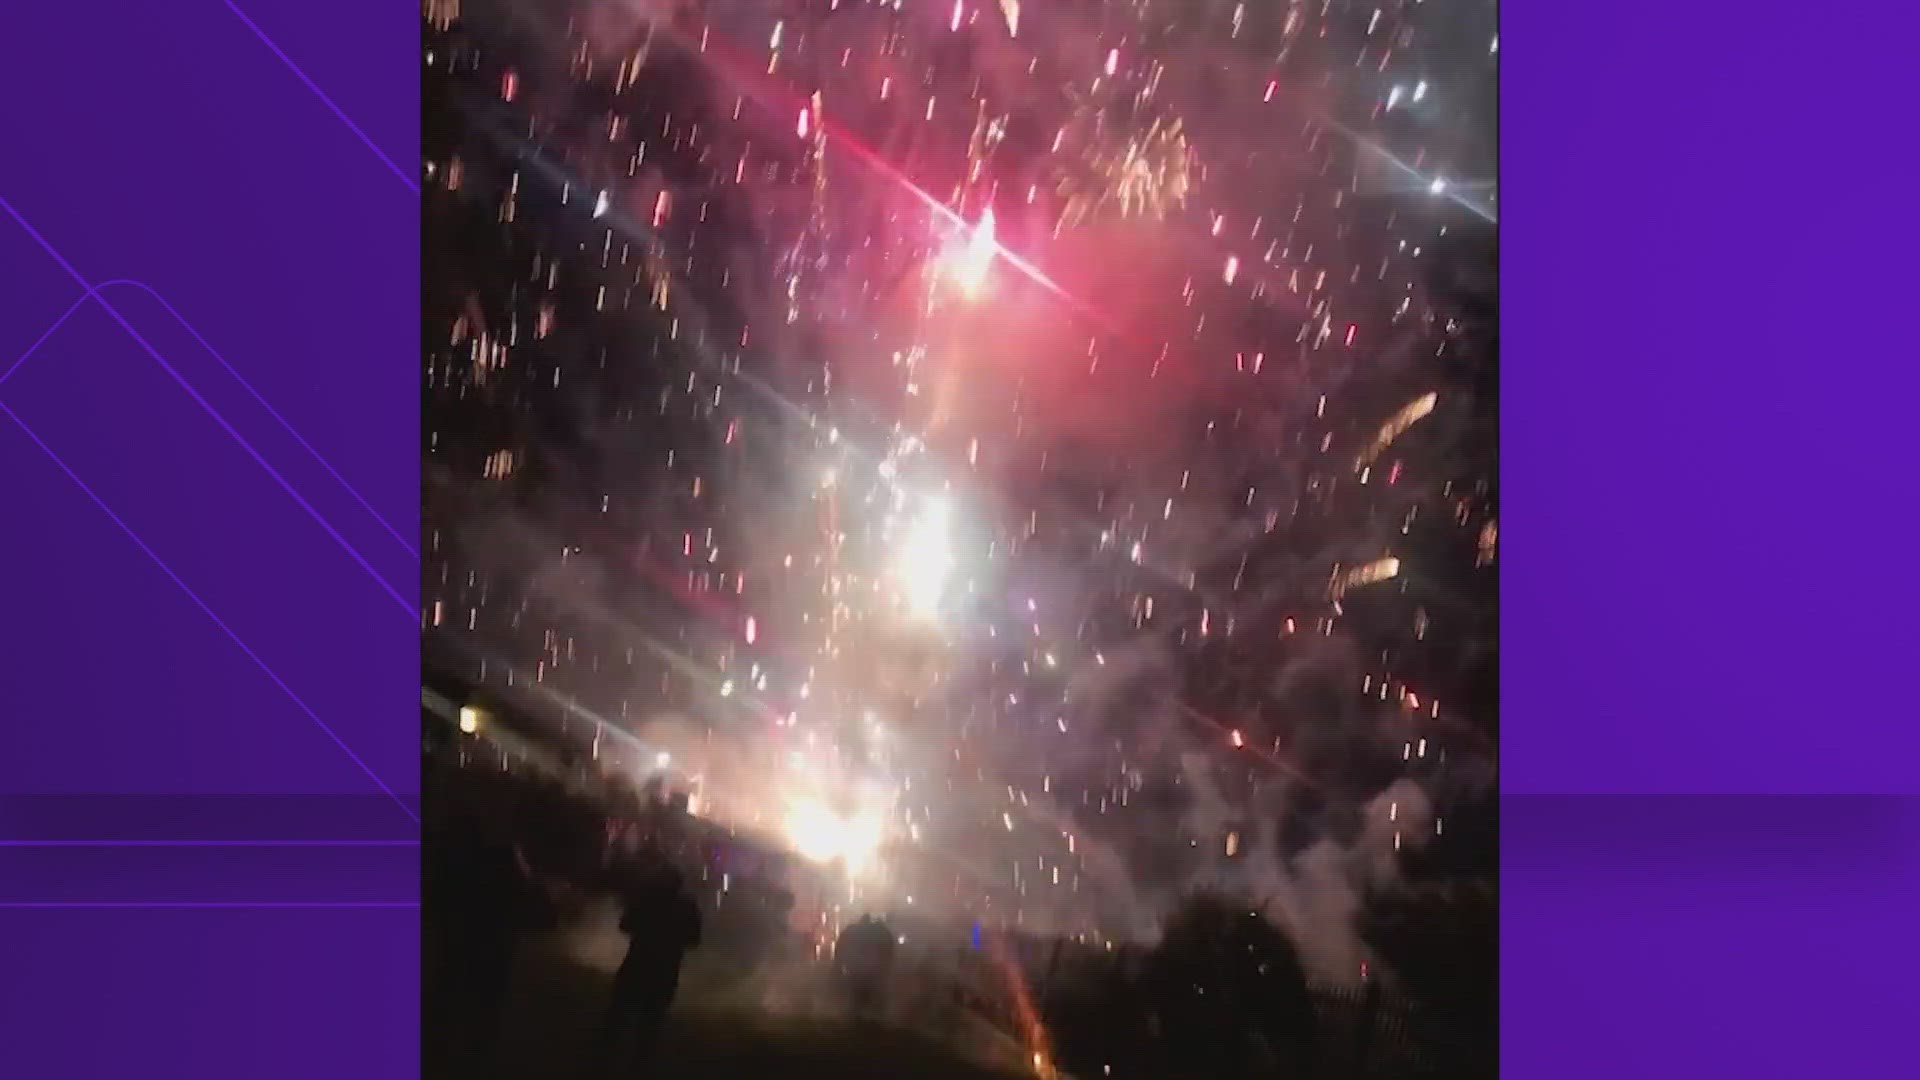 Three people were injured Tuesday after a batch of fireworks exploded during a Fourth of July celebration in a Lake Conroe neighborhood.